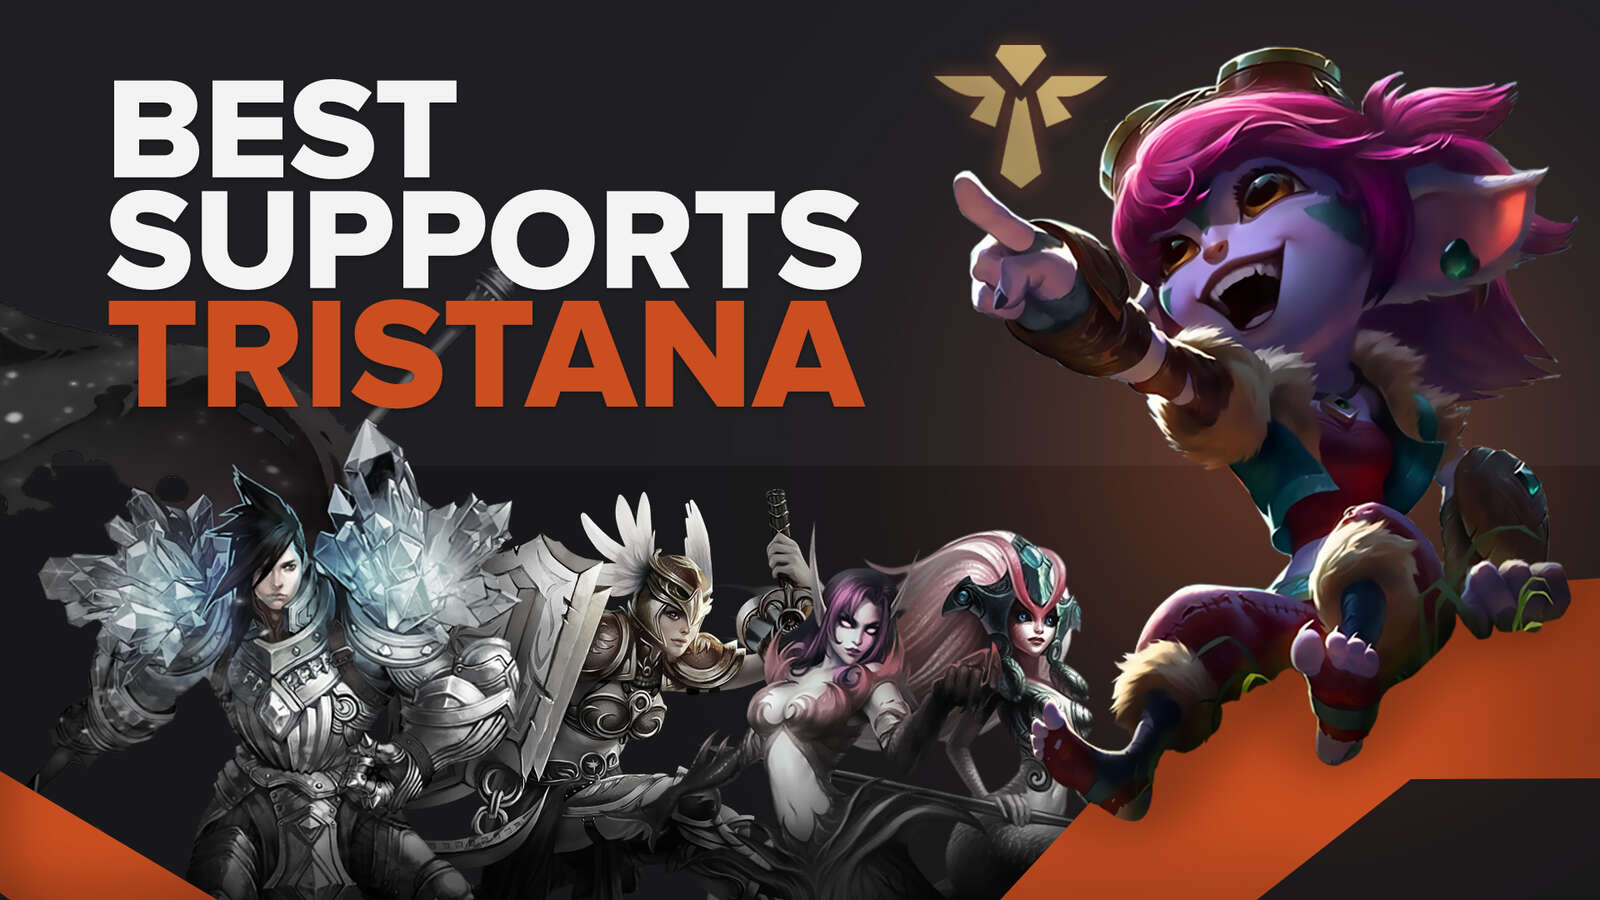 5 Best Support Champions for Tristana in LoL